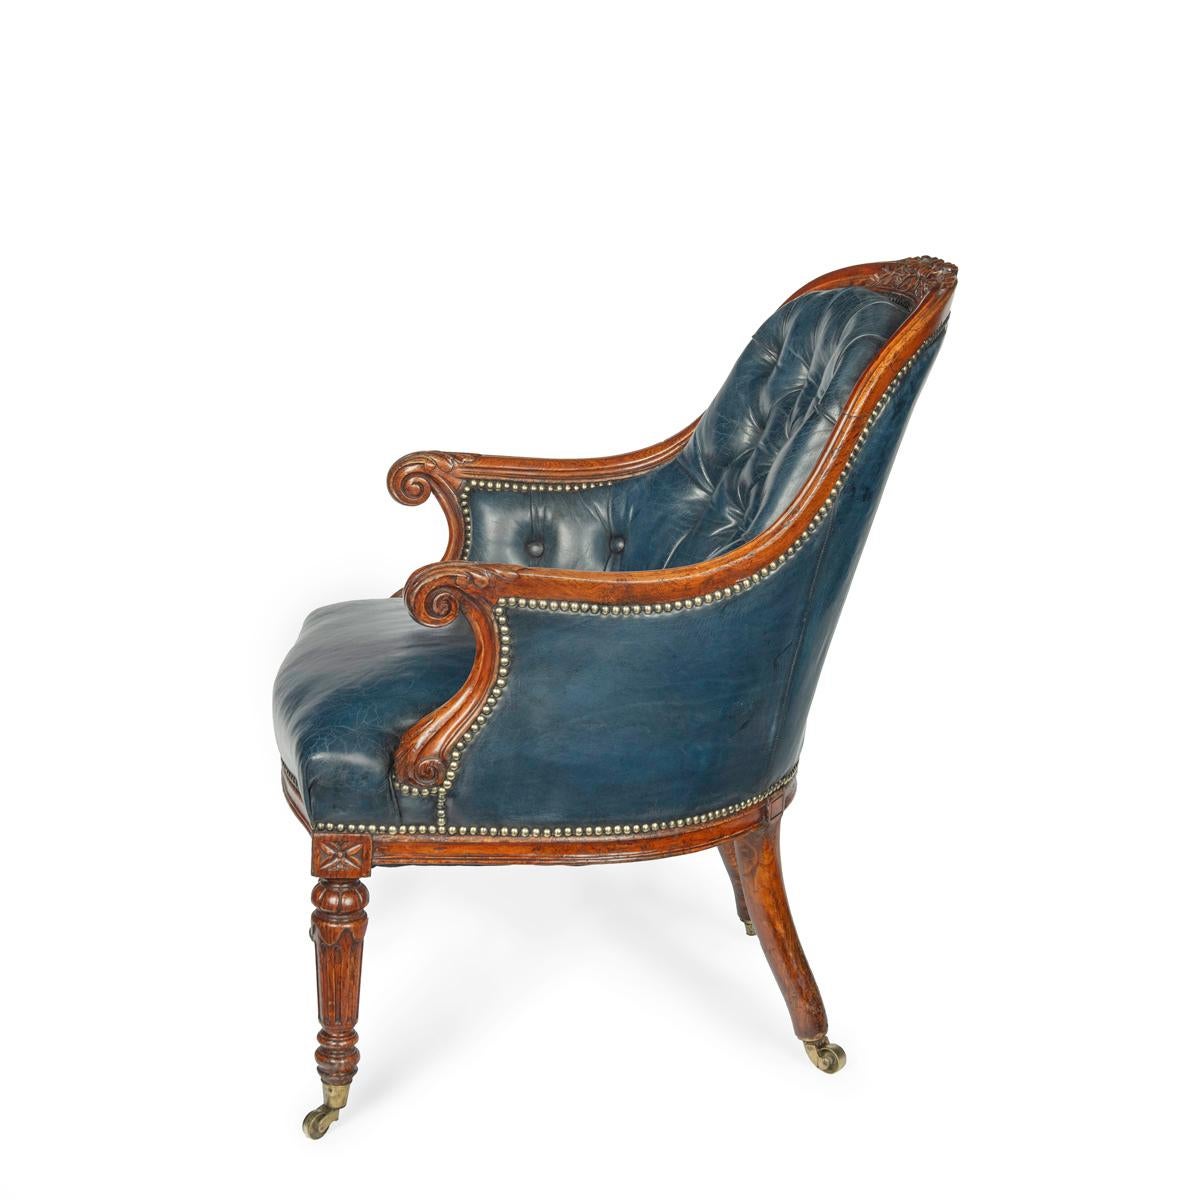 A Victorian blue leather oak library chair, the arched back continuous with the scroll arms, and carved with beribboned foliate sprays in the centre, the shaped seat rail set above turned, reeded tapering legs, original brass castors. Re-upholstered